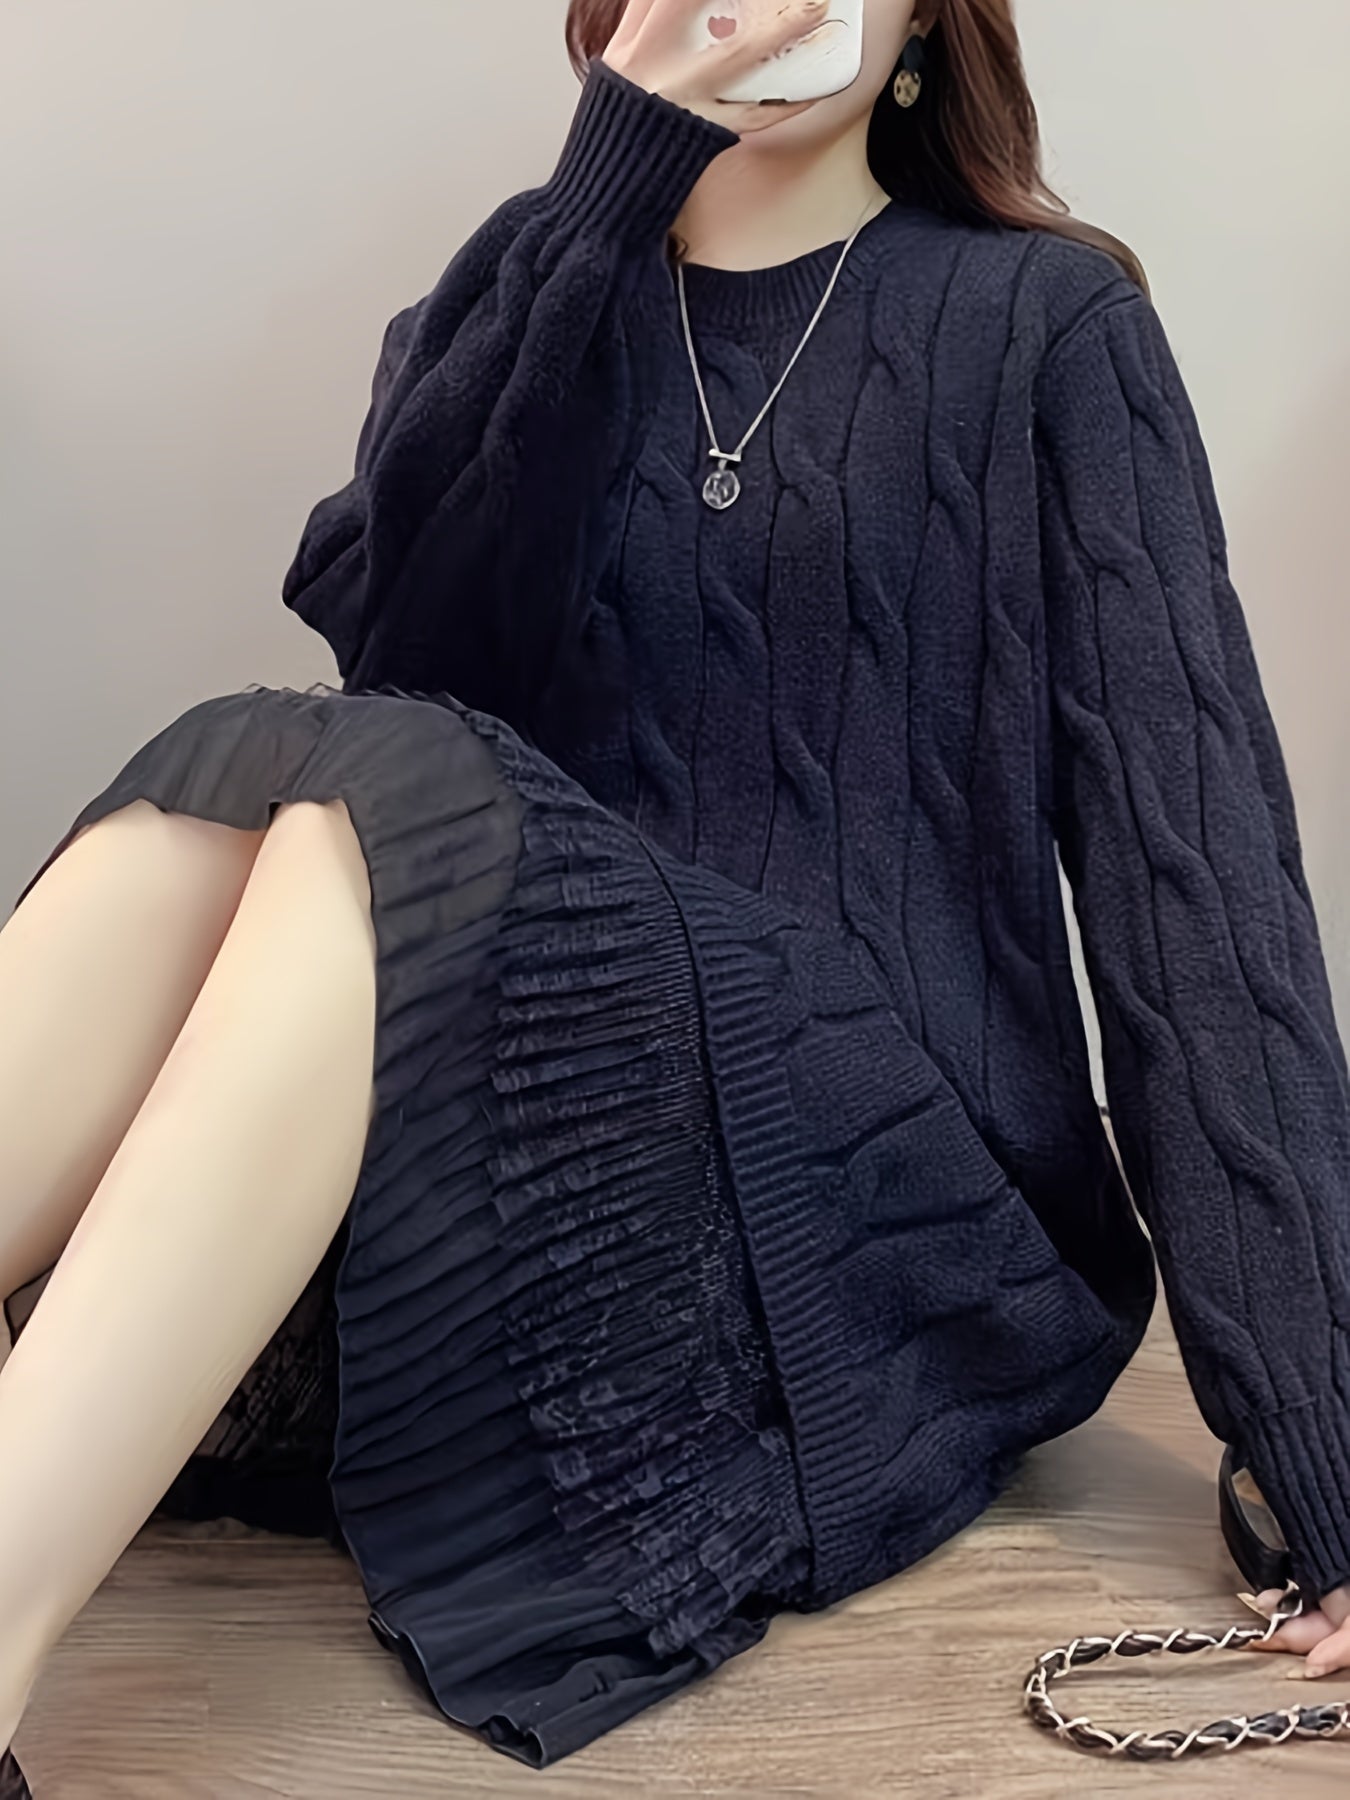 Antmvs Ladies Crew Neck Loose Sweater Dress, Solid Long Sleeve Sweater Dress, Casual Sweater Dress For Fall & Winter, Women's Clothing